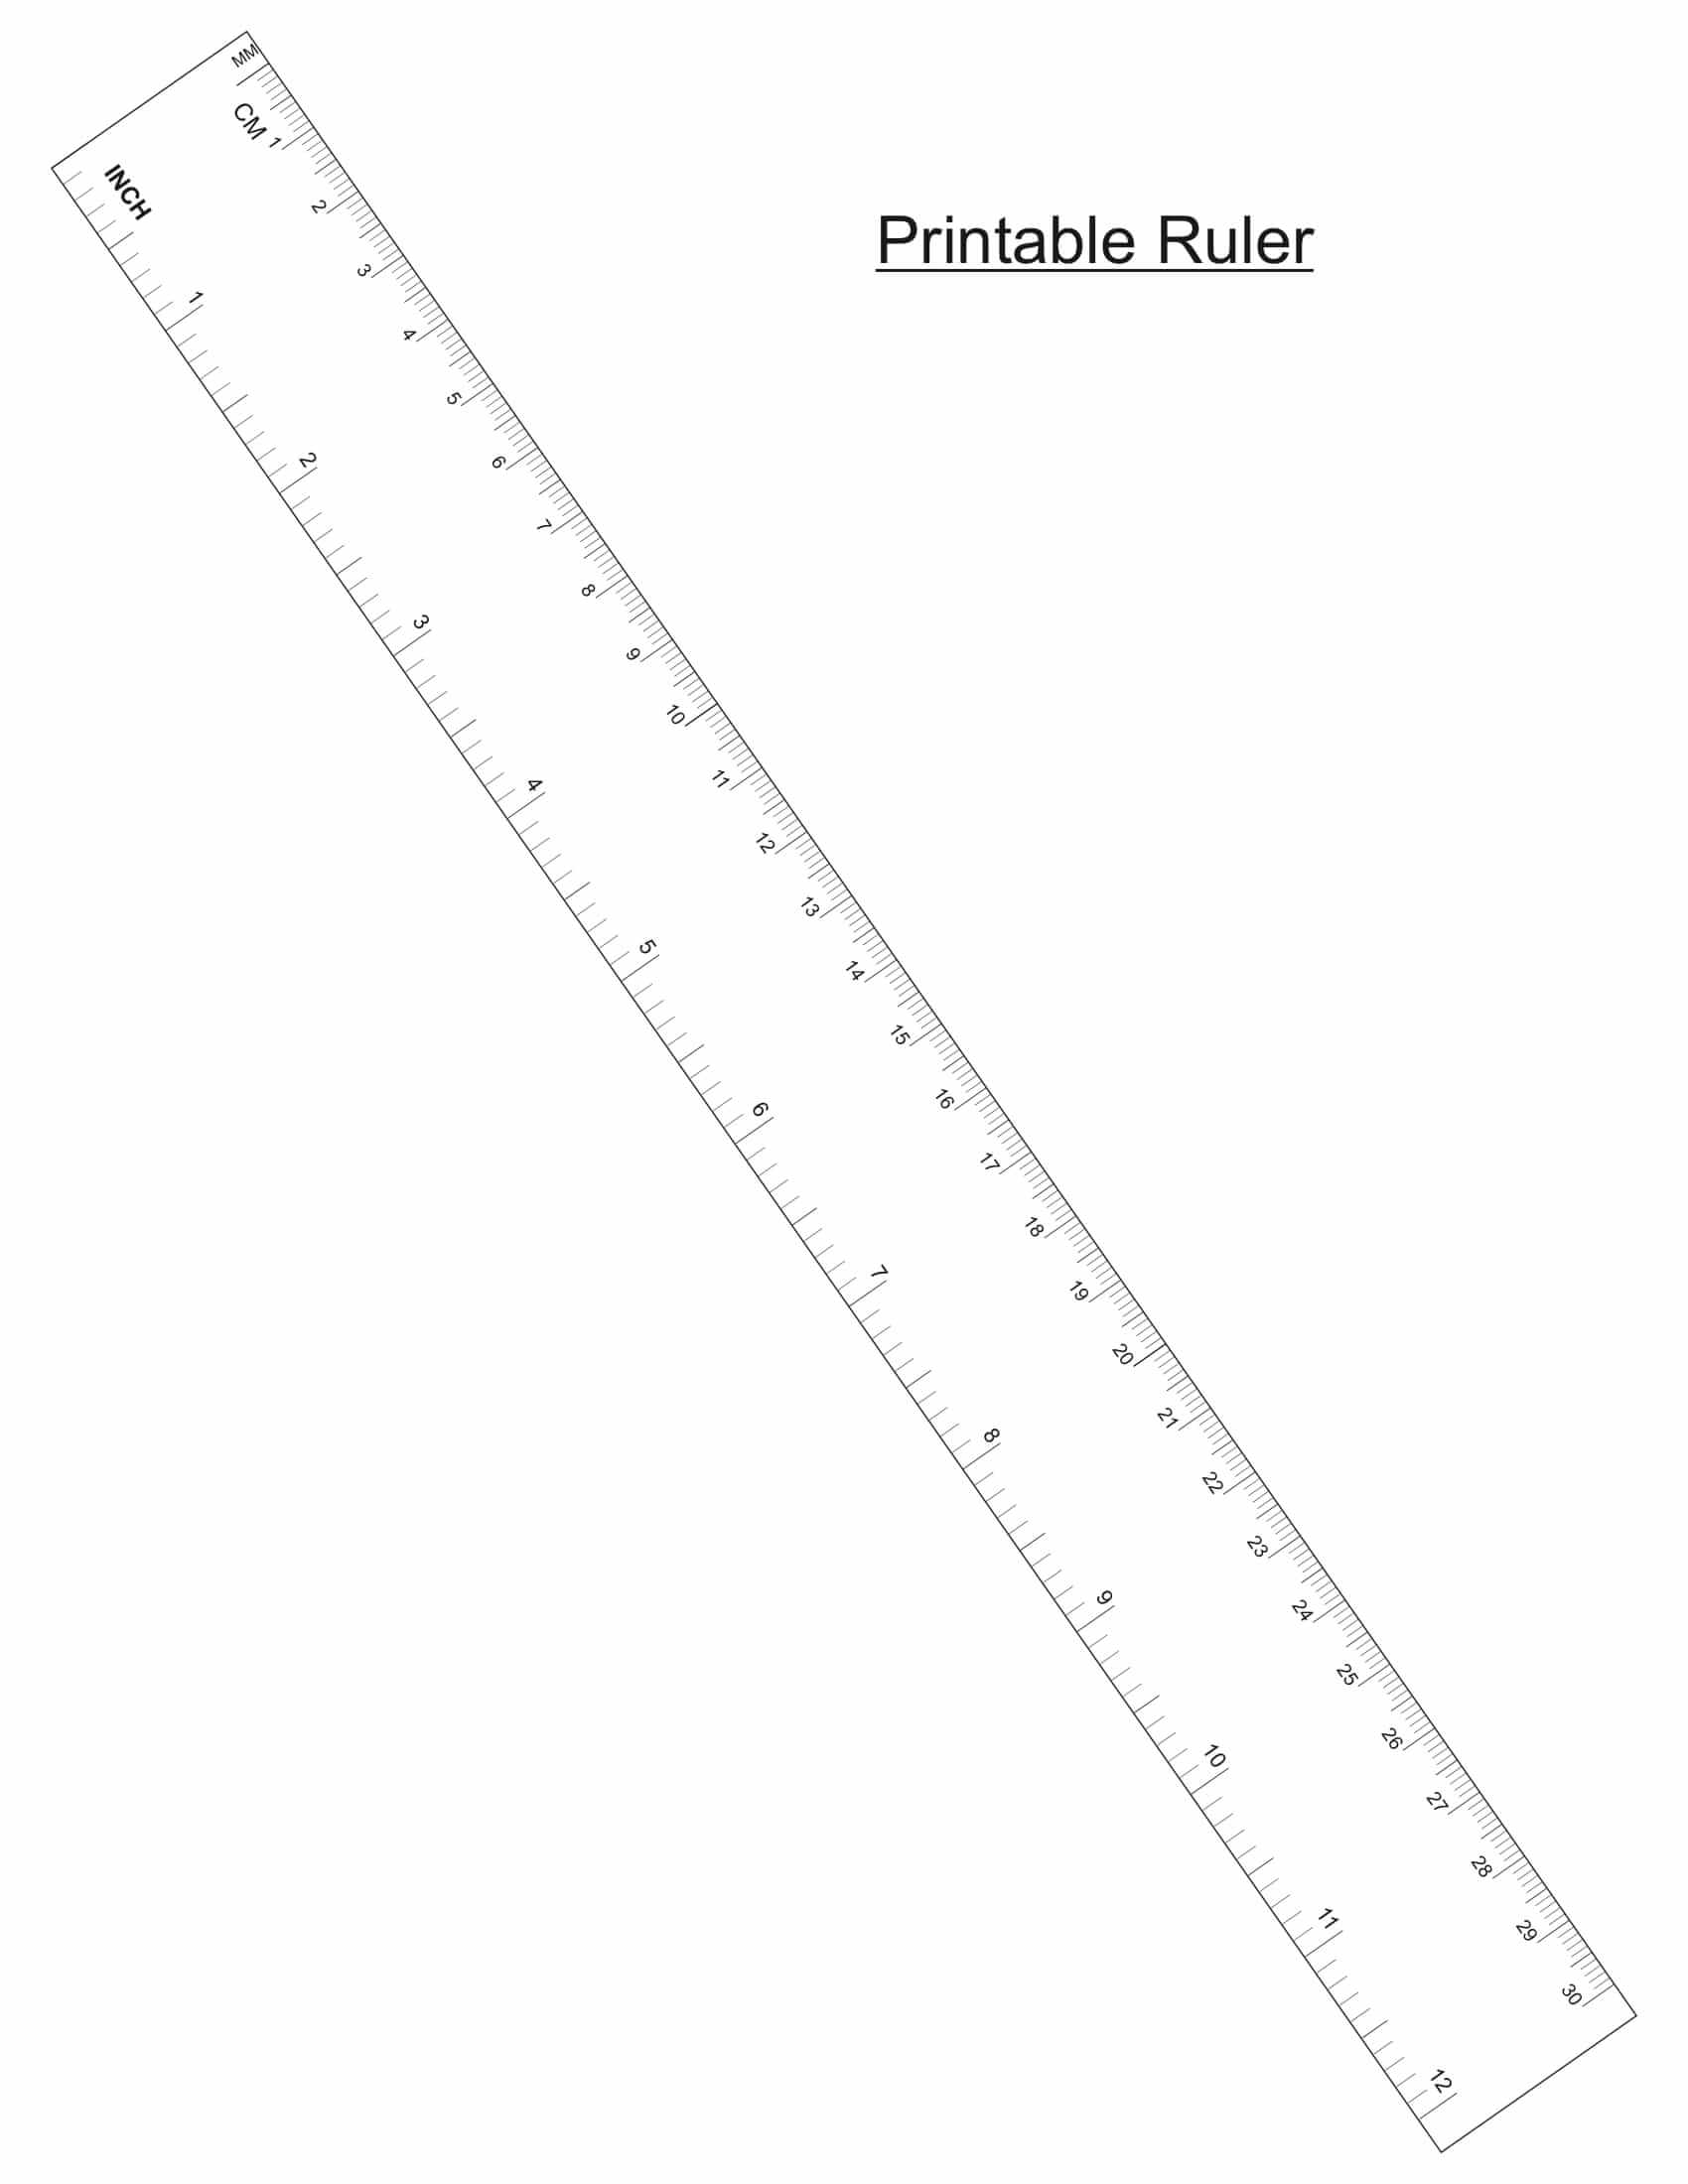 12-inch by 1/4 inch Ruler - Printable Ruler